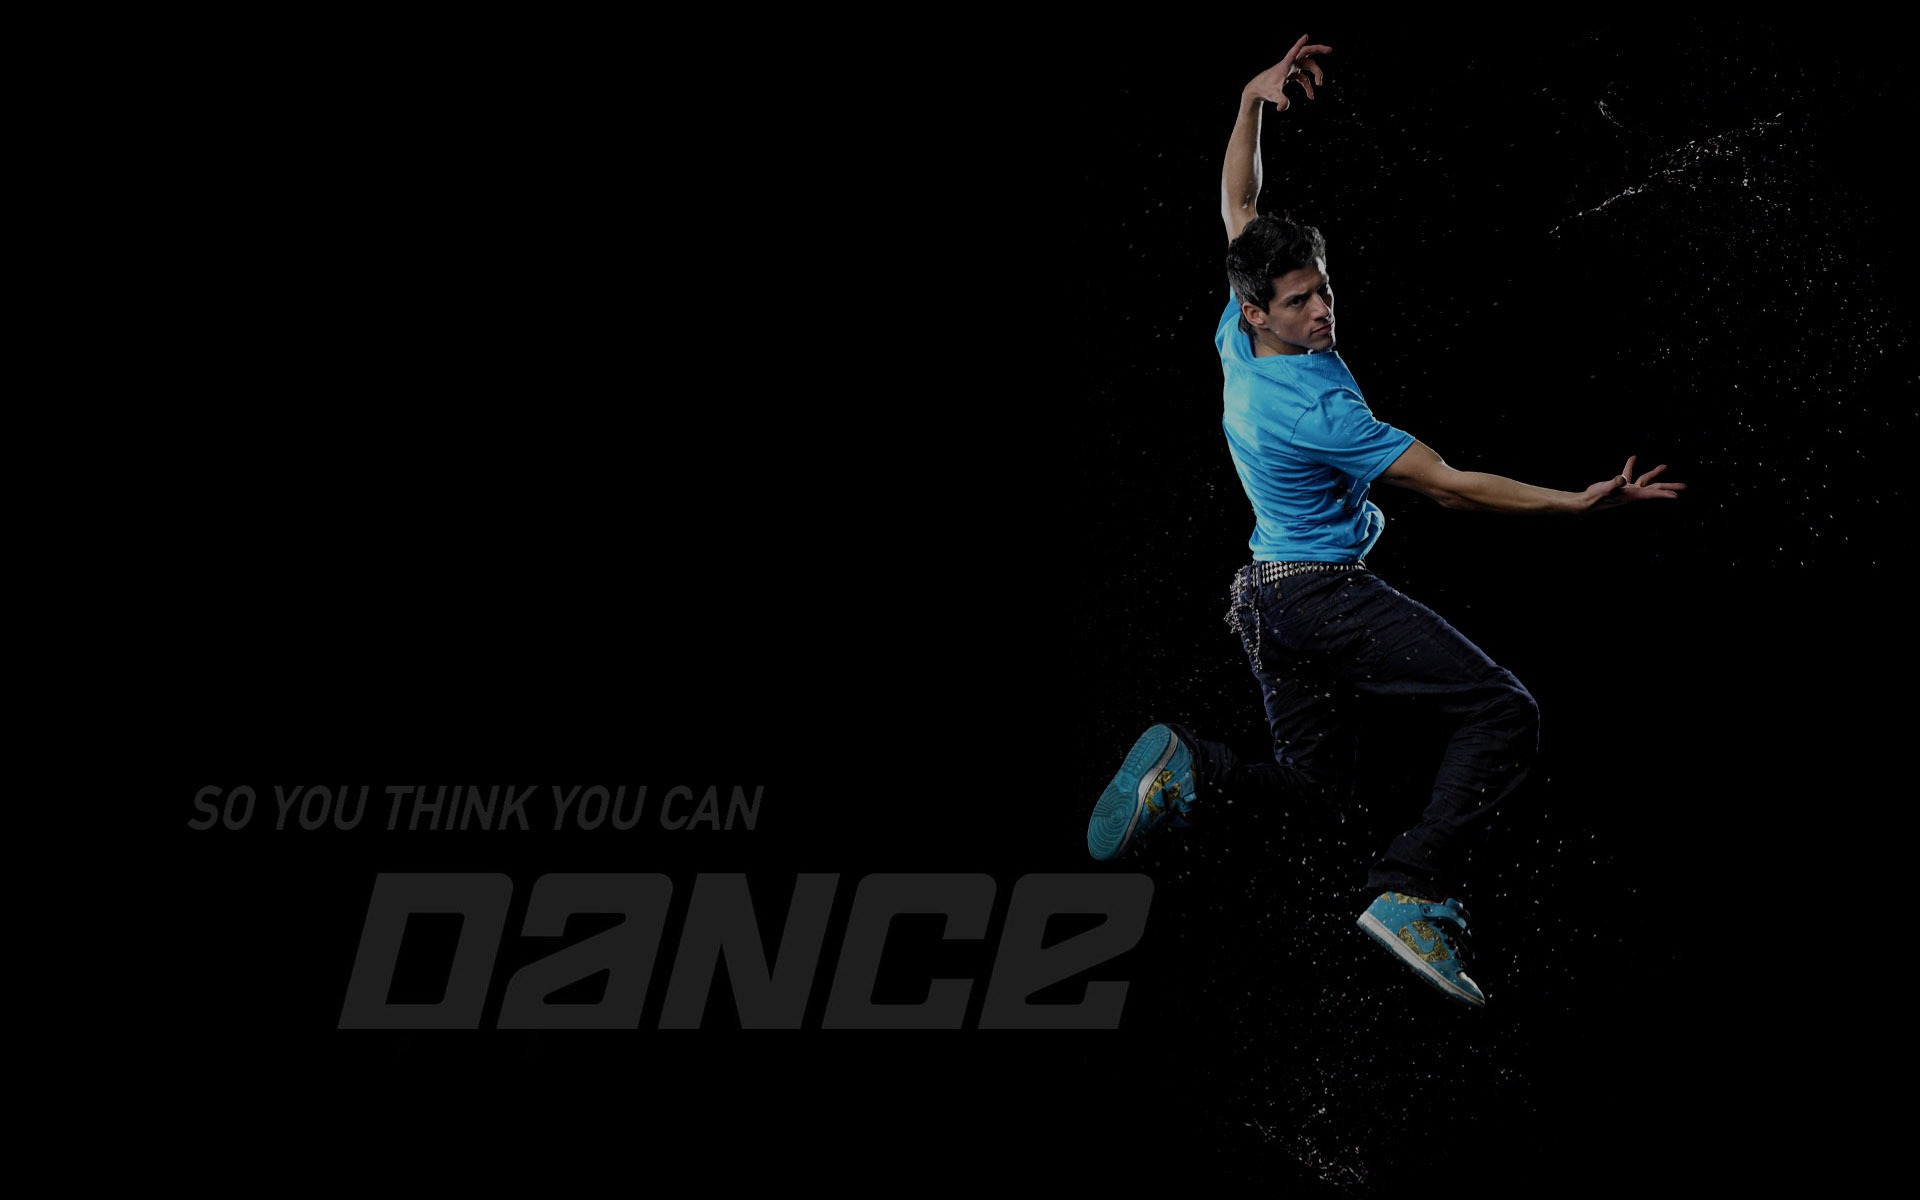 So You Think You Can Dance 舞林爭霸壁紙(二) #18 - 1920x1200